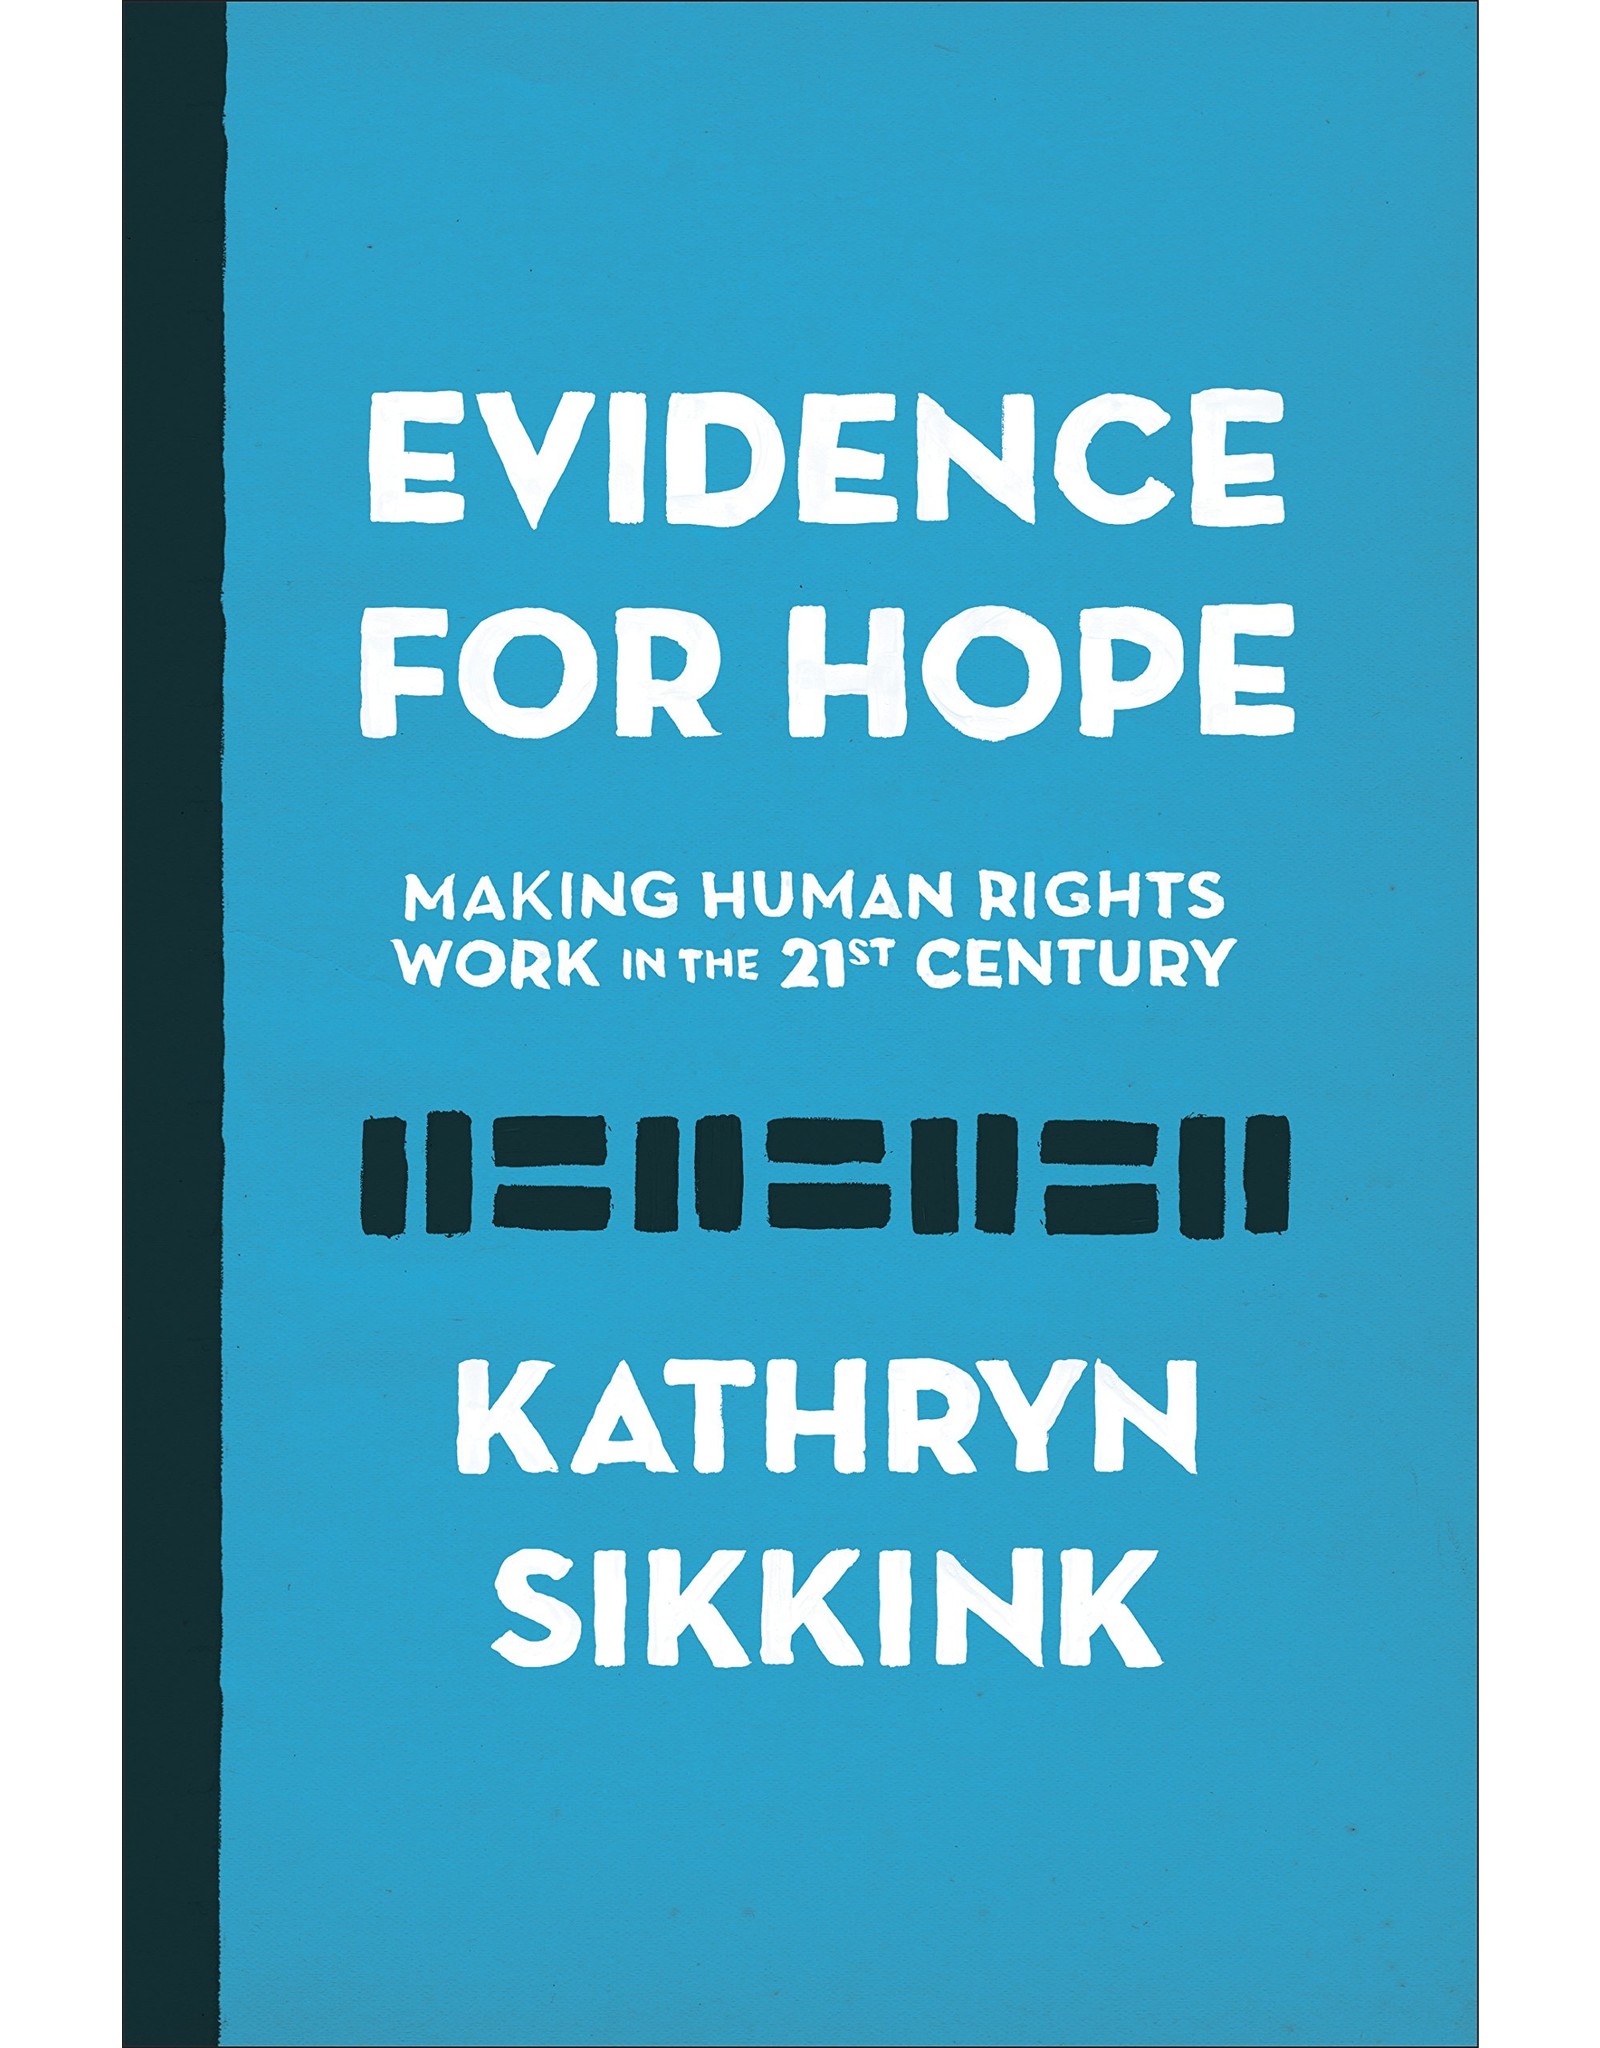 Textbook Evidence for Hope: Making Human Rights Work in the 21st Century